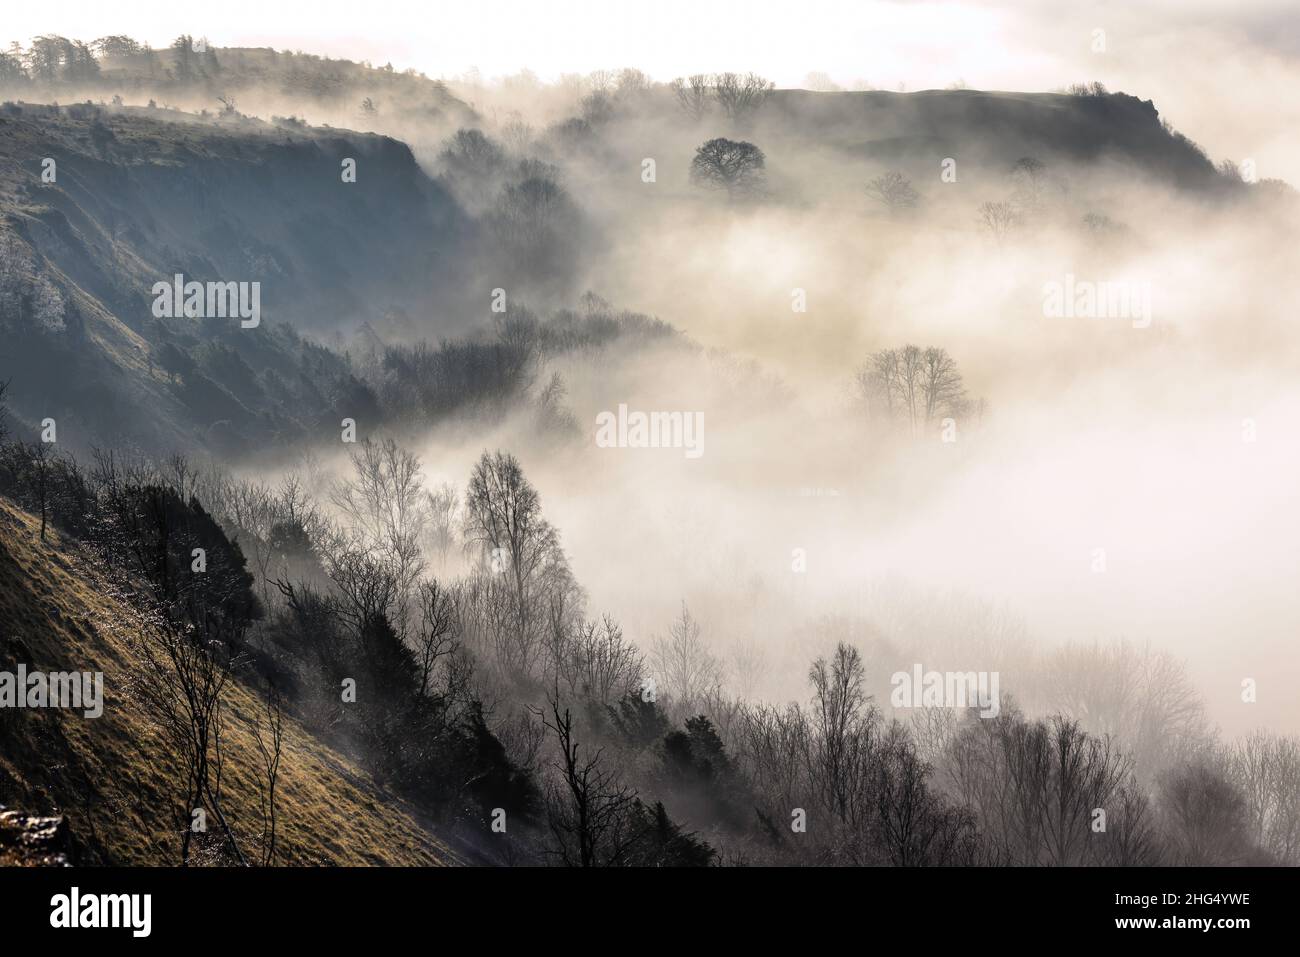 Scout Scar, Cumbria, England, as the sun broke through the mist 18th January 2022.  Taken from the edge of the cliffs looking eastwards with the winters sun low over the horizon, picking out the trees in the mist. Credit: Russell Millner/Alamy Live News Stock Photo